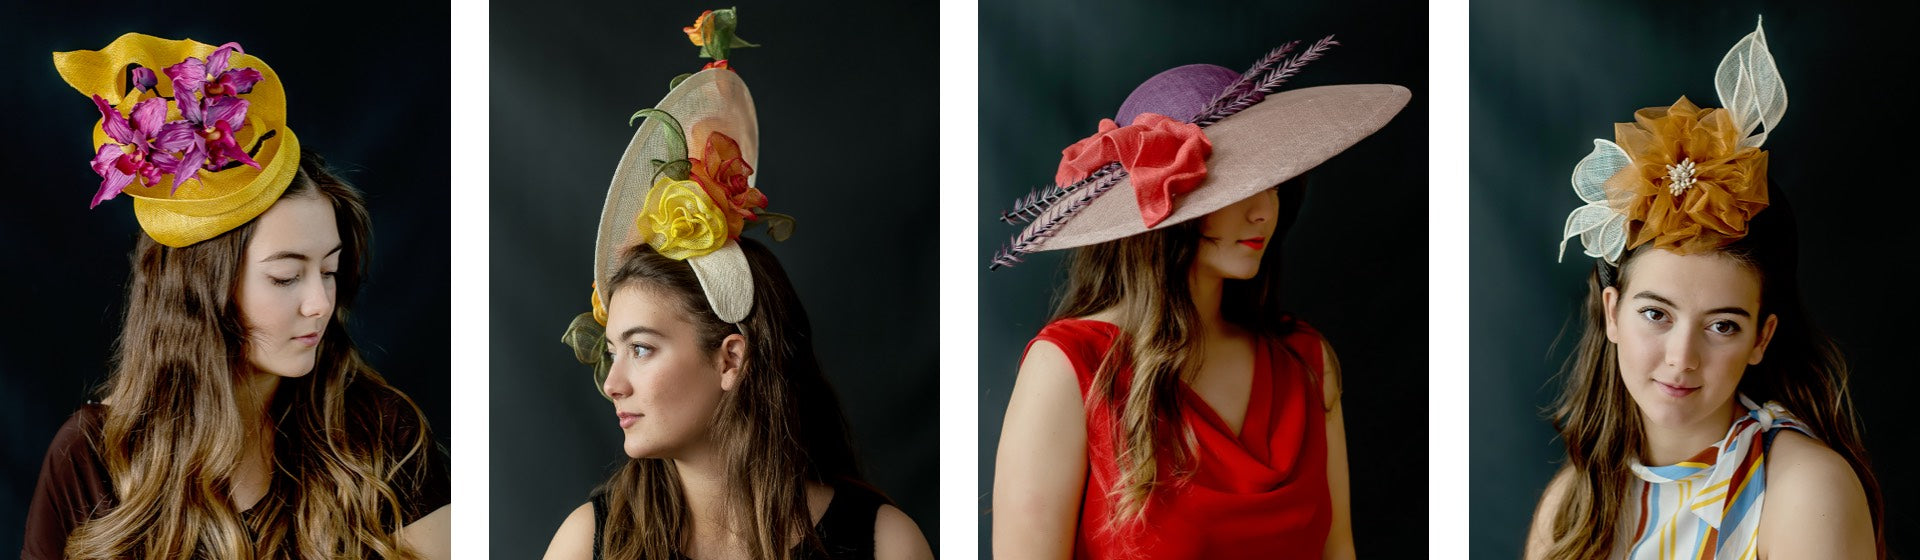 Bespoke Hats for Special Occasions